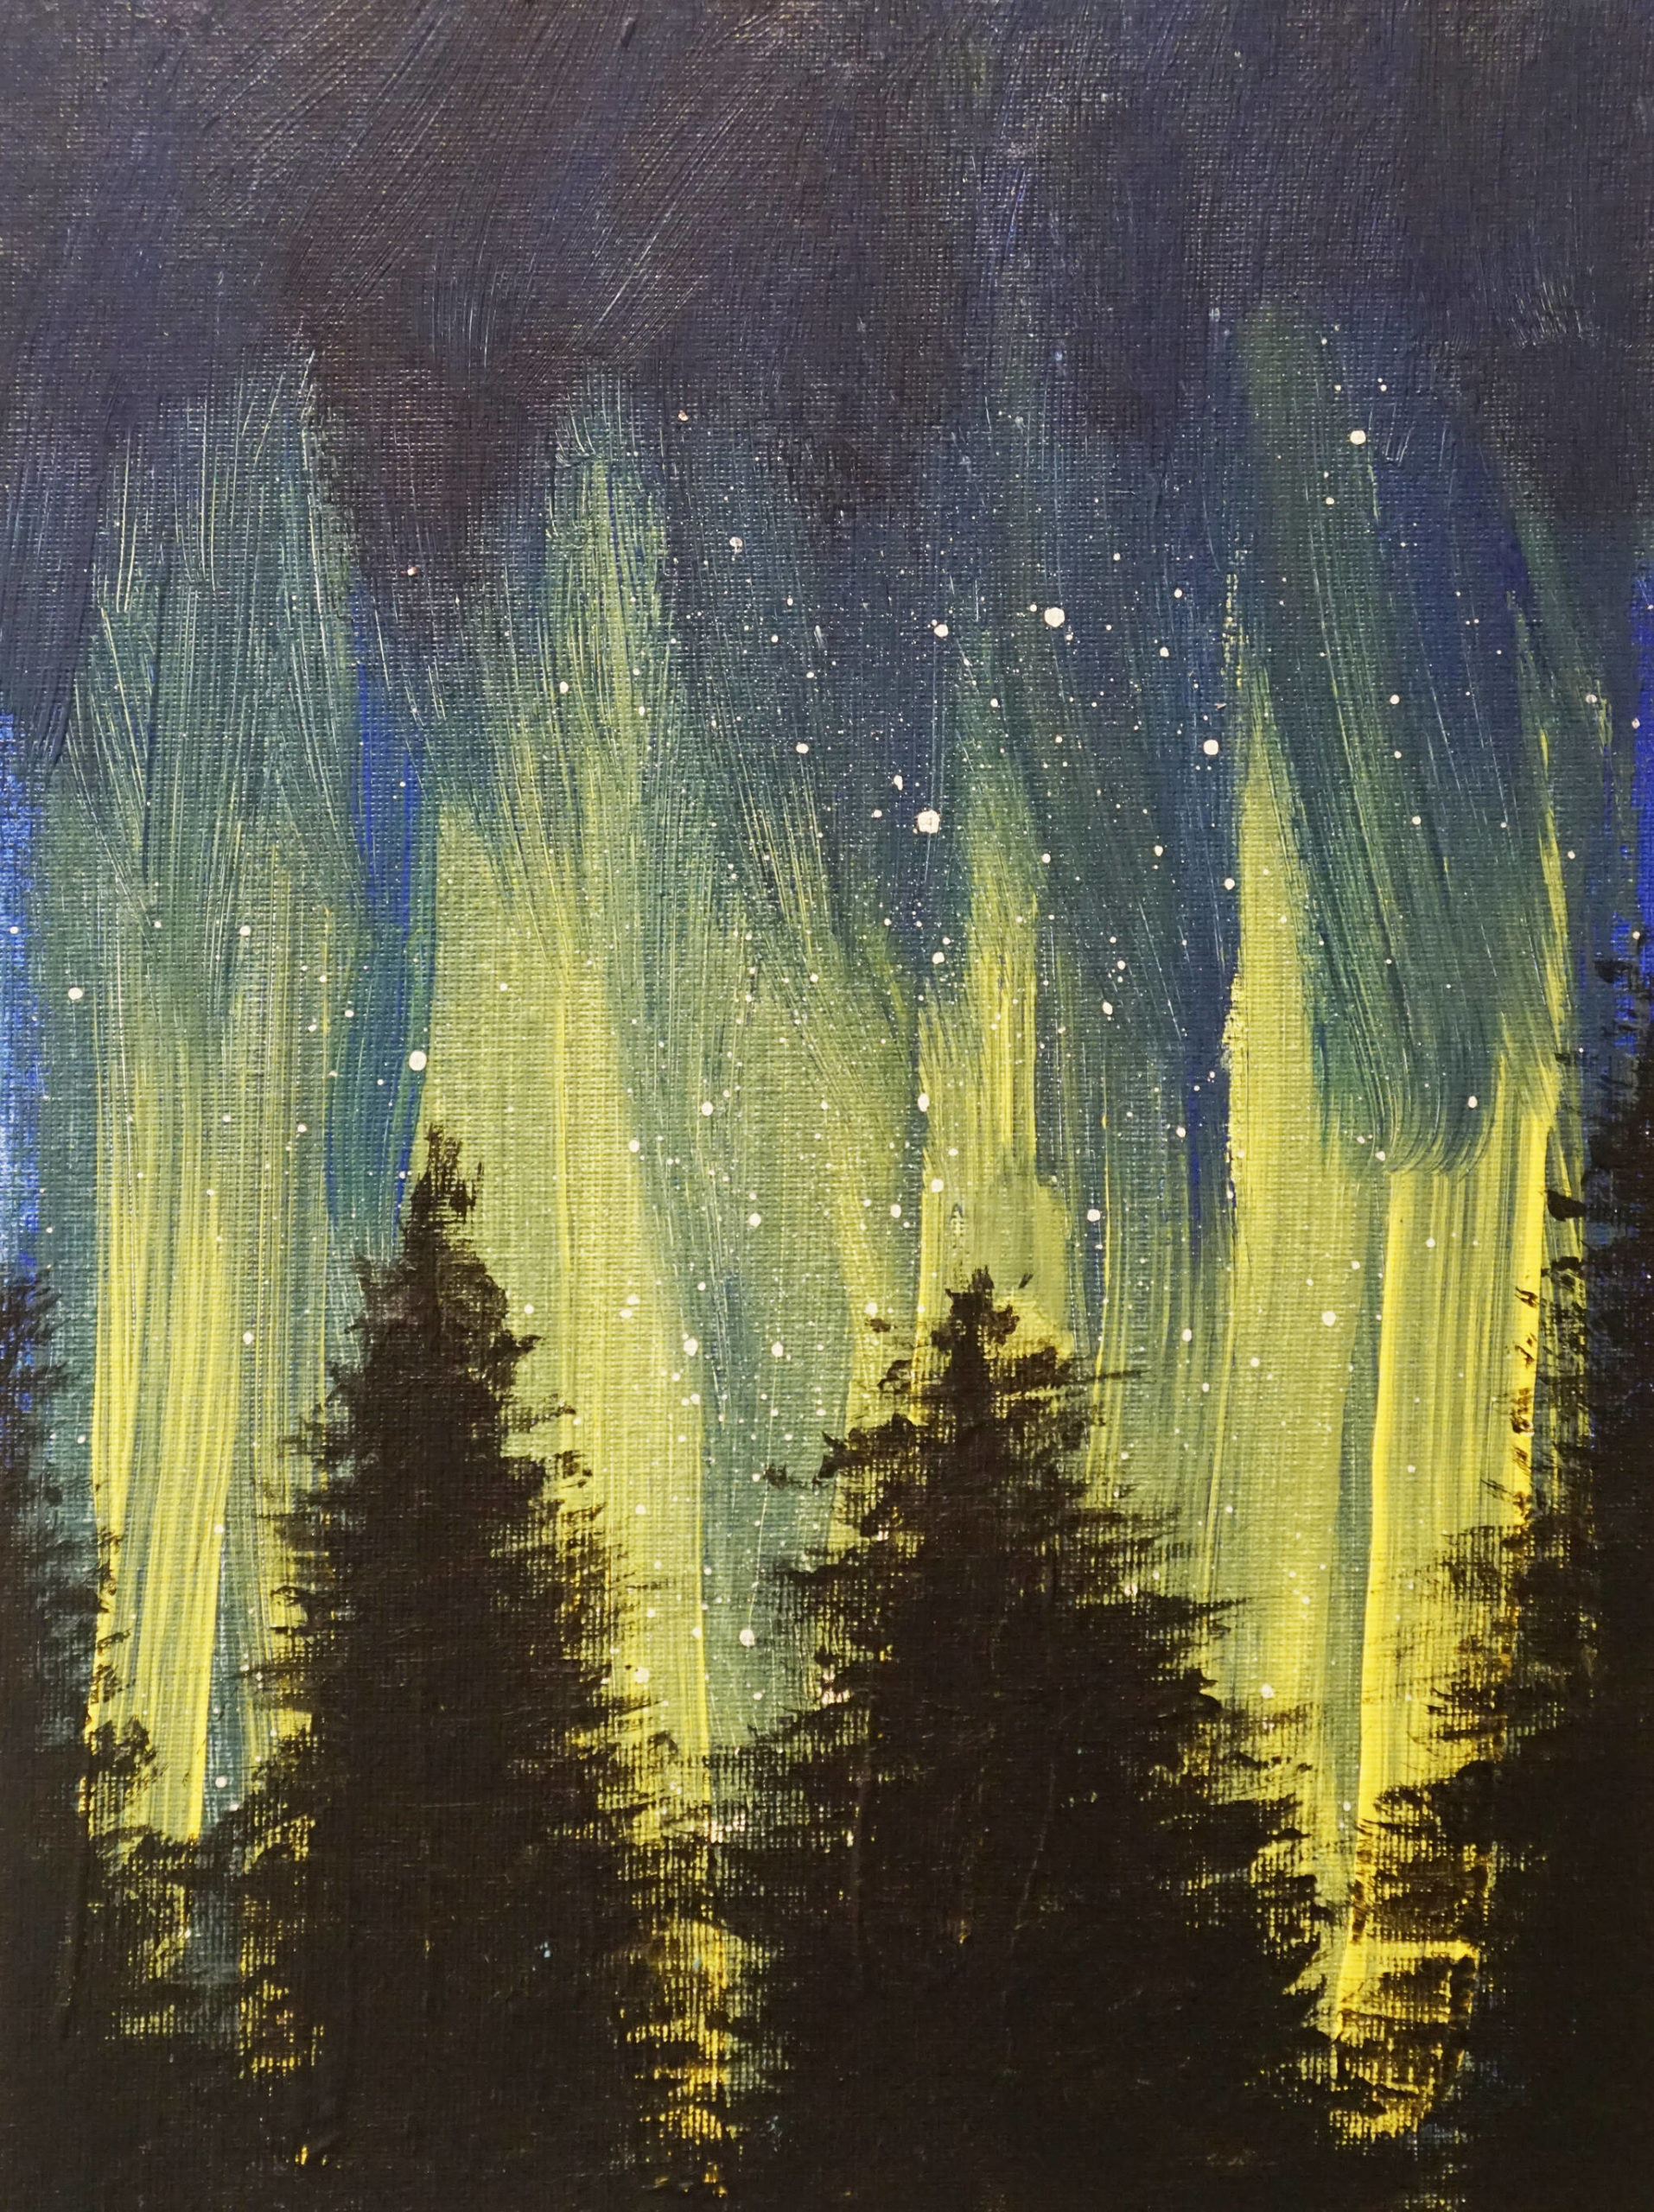 Grade 6 student Pearl Sethi’s acrylic painting of the northern lights. (Photo by Michael Armstrong/Homer News)